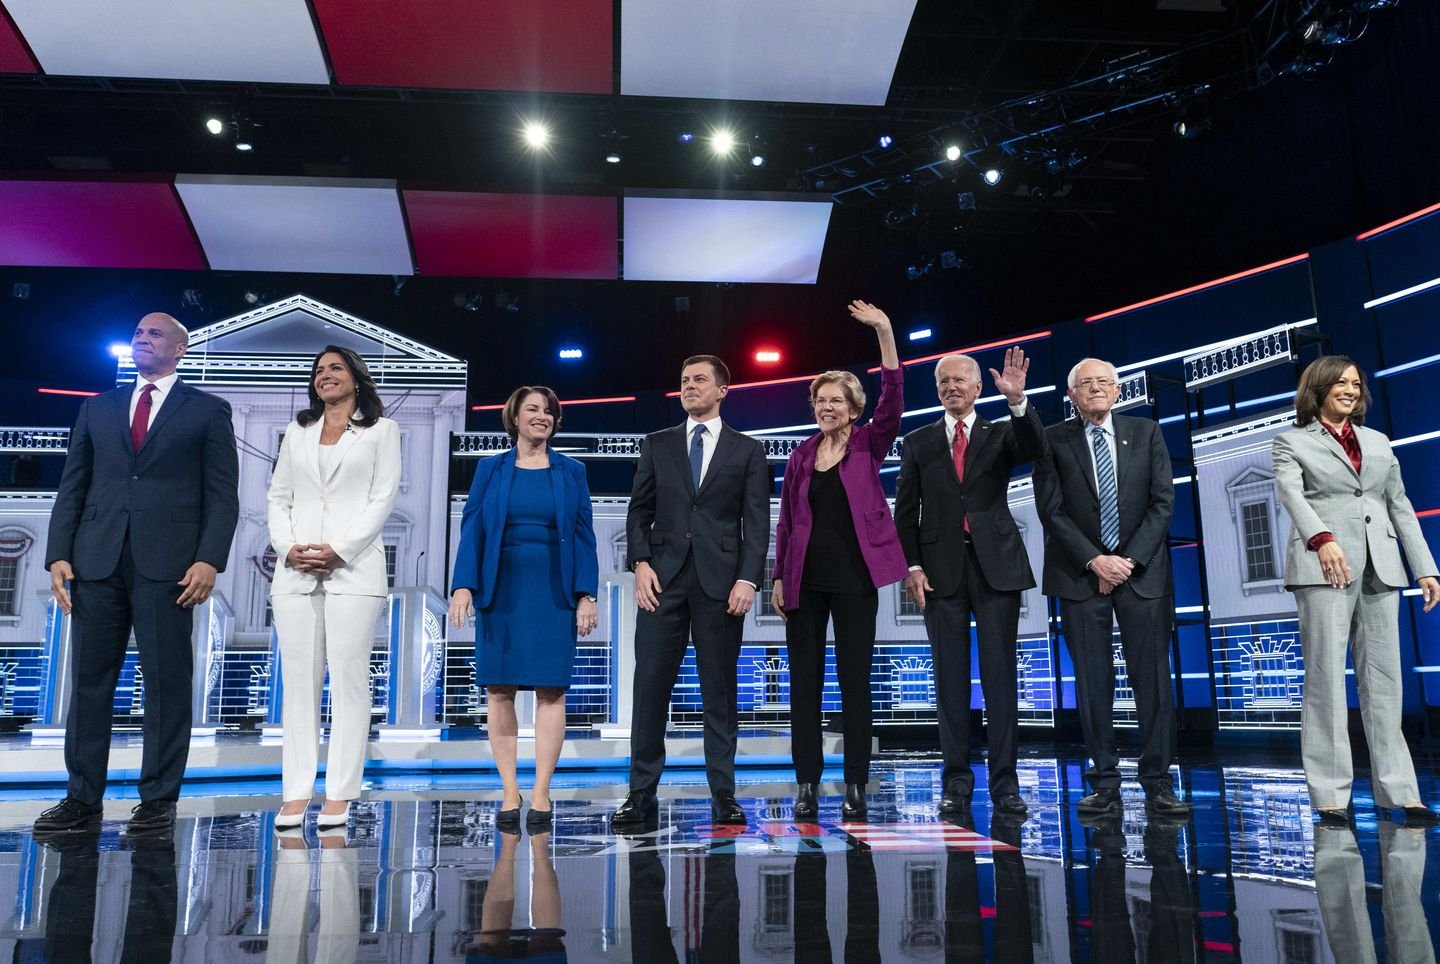 What happened in the Democratic debate: Candidates squabble over black voters, draw contrasts with Trump